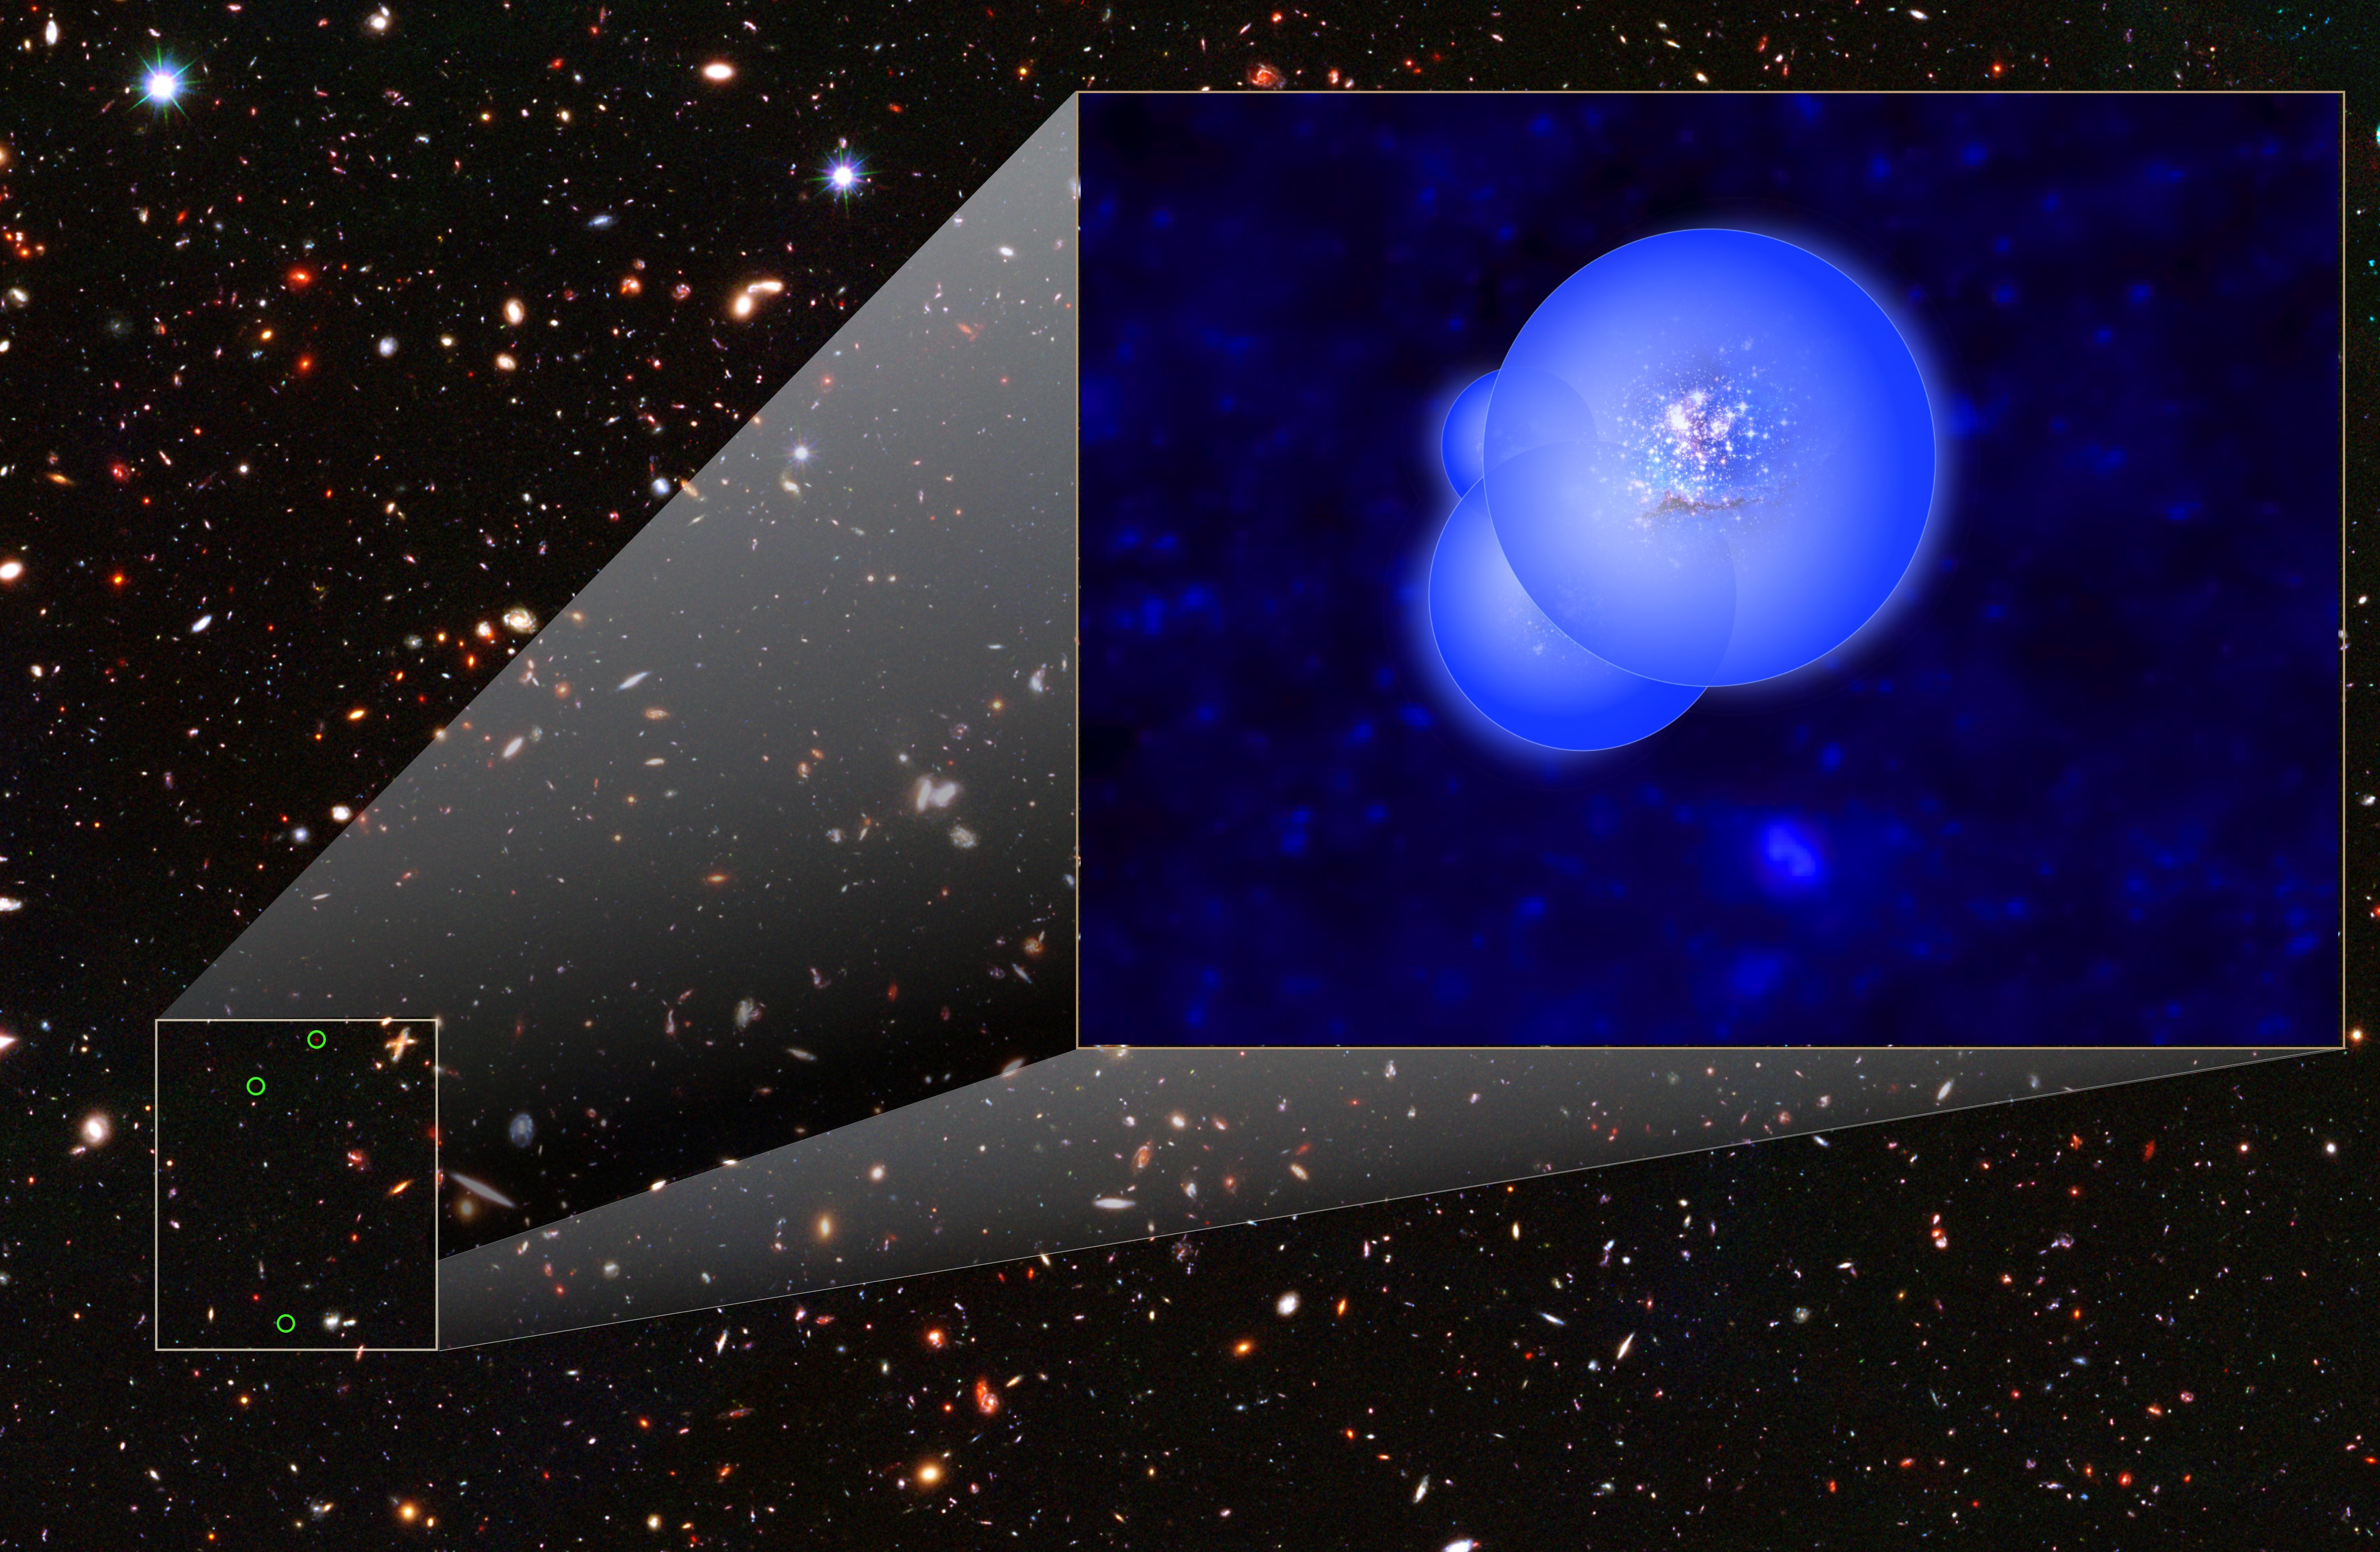 Inset: This illustration of the EGS77 galaxy group shows the galaxies surrounded by overlapping bubbles of ionized hydrogen. By transforming light-quenching hydrogen atoms to ionized gas, ultraviolet starlight is thought to have formed such bubbles throughout the early universe, gradually transitioning it from opaque to completely transparent. Background: This composite of archival Hubble Space Telescope visible and near-infrared images includes the three galaxies of EGS77 (green circles). Credits: NASA, ESA and V. Tilvi (ASU) (Click image to download hi-res version)